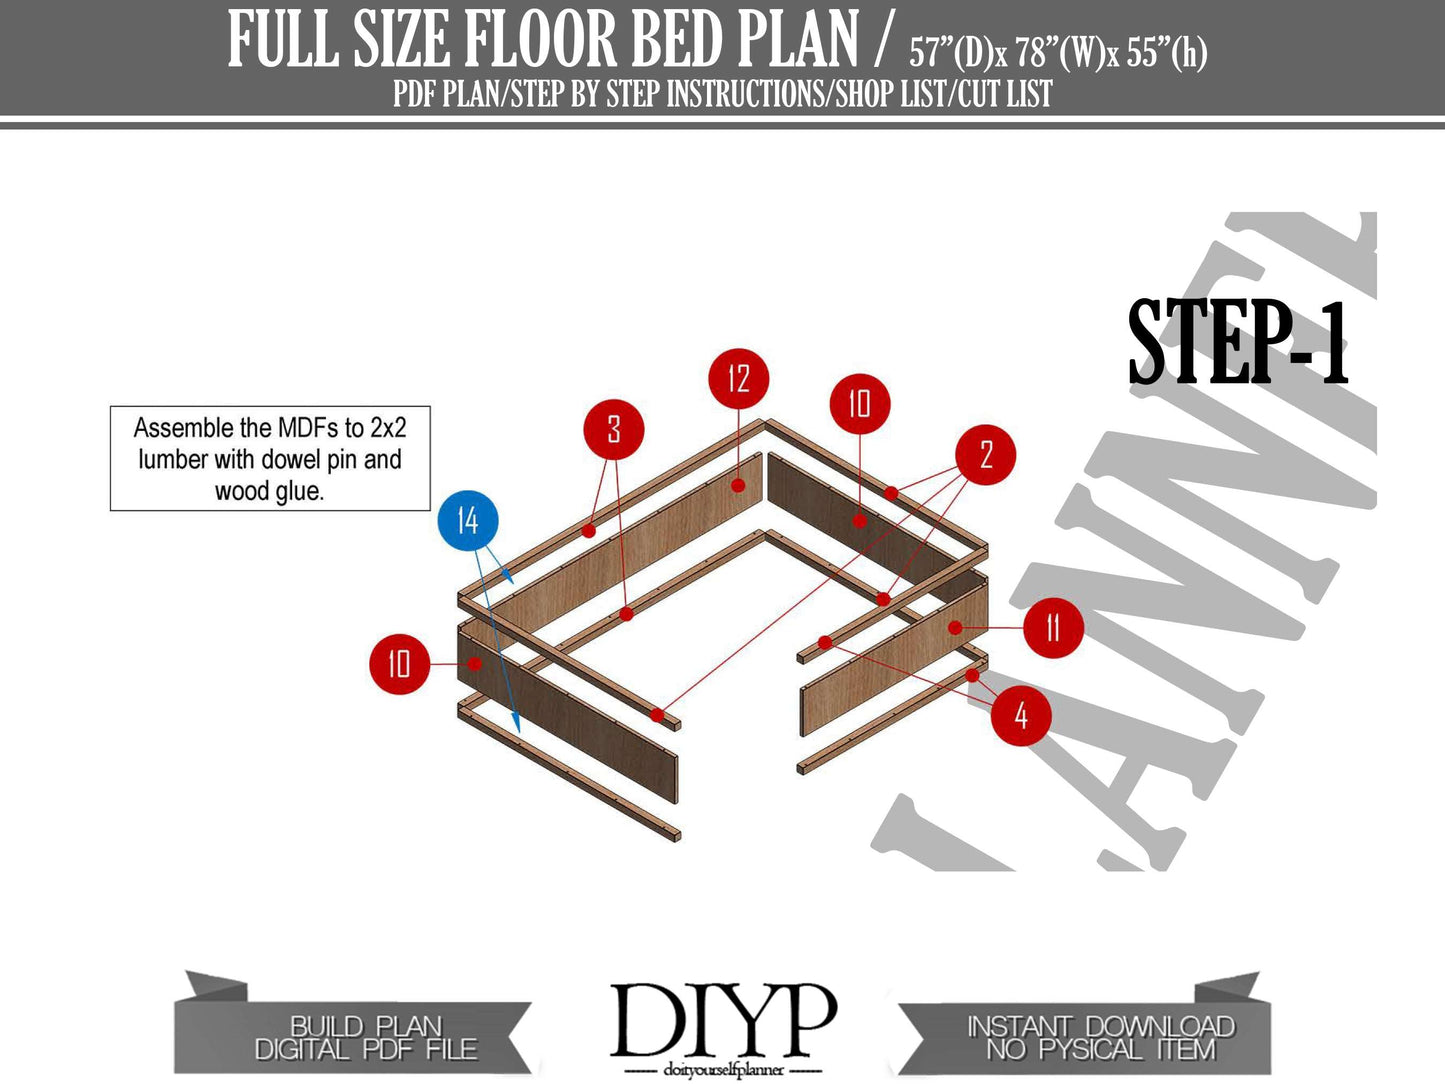 Elevate Your Bedroom with a DIY Full Size Floor Bed Frame Plan | Create Your Dream Bed Today!